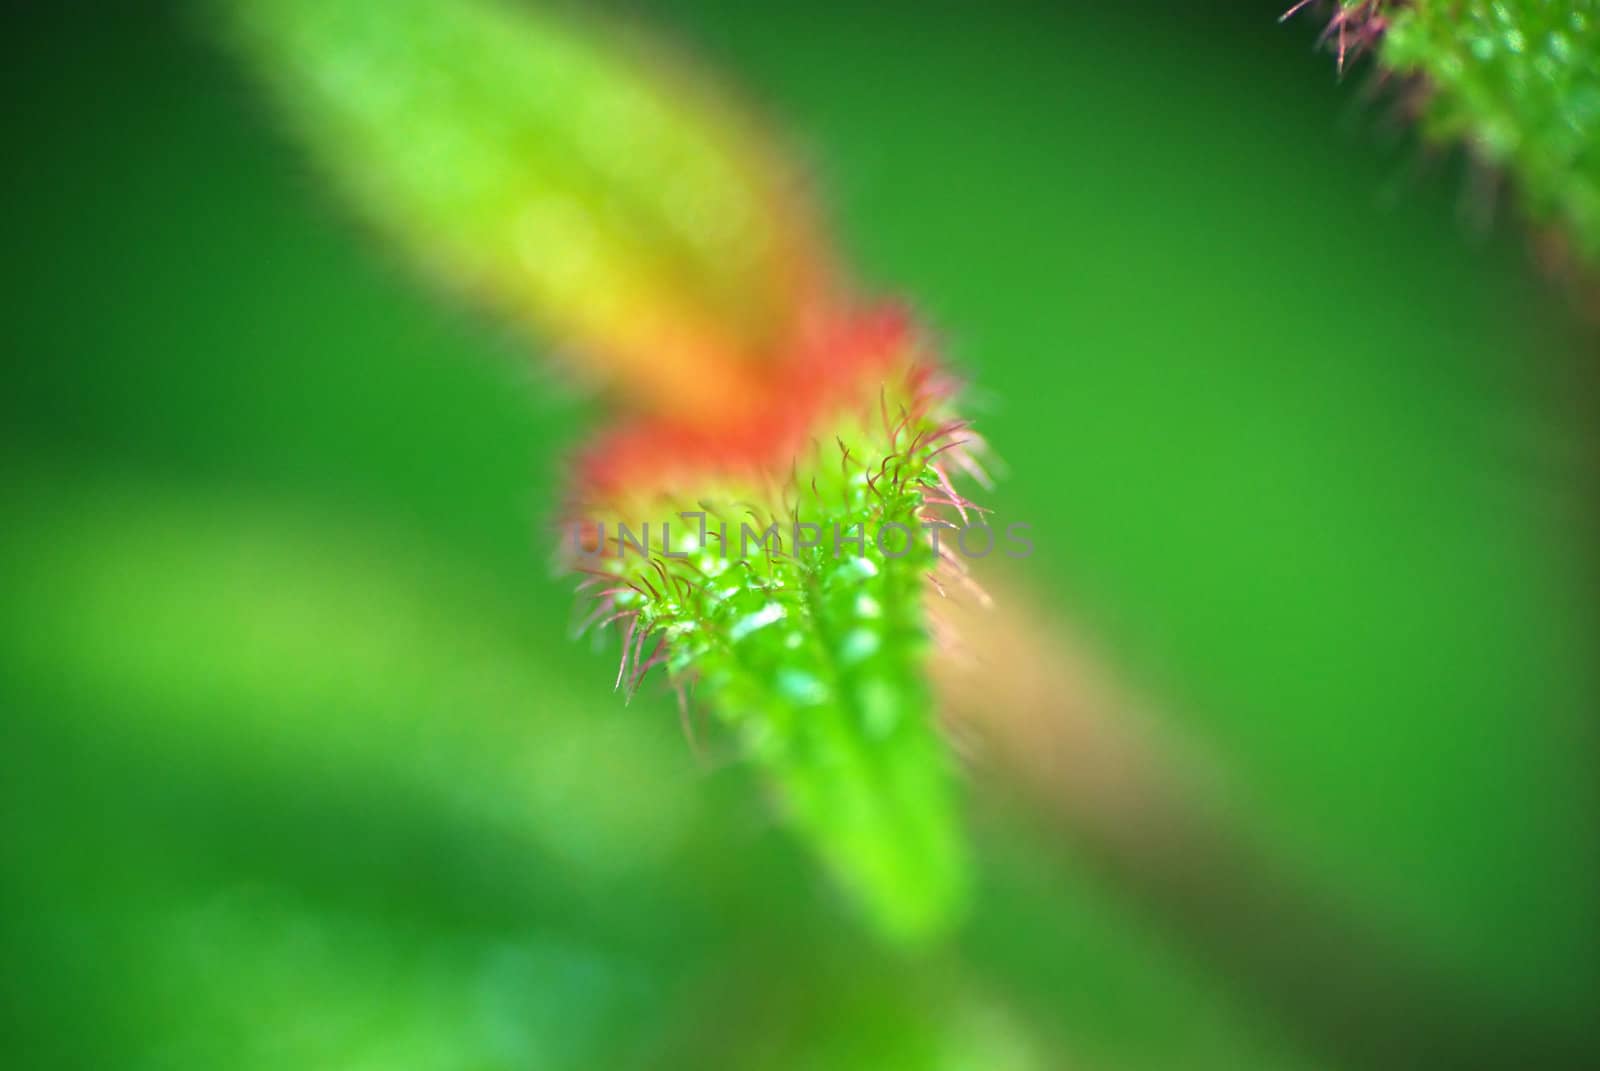 Macro view of a new leaf